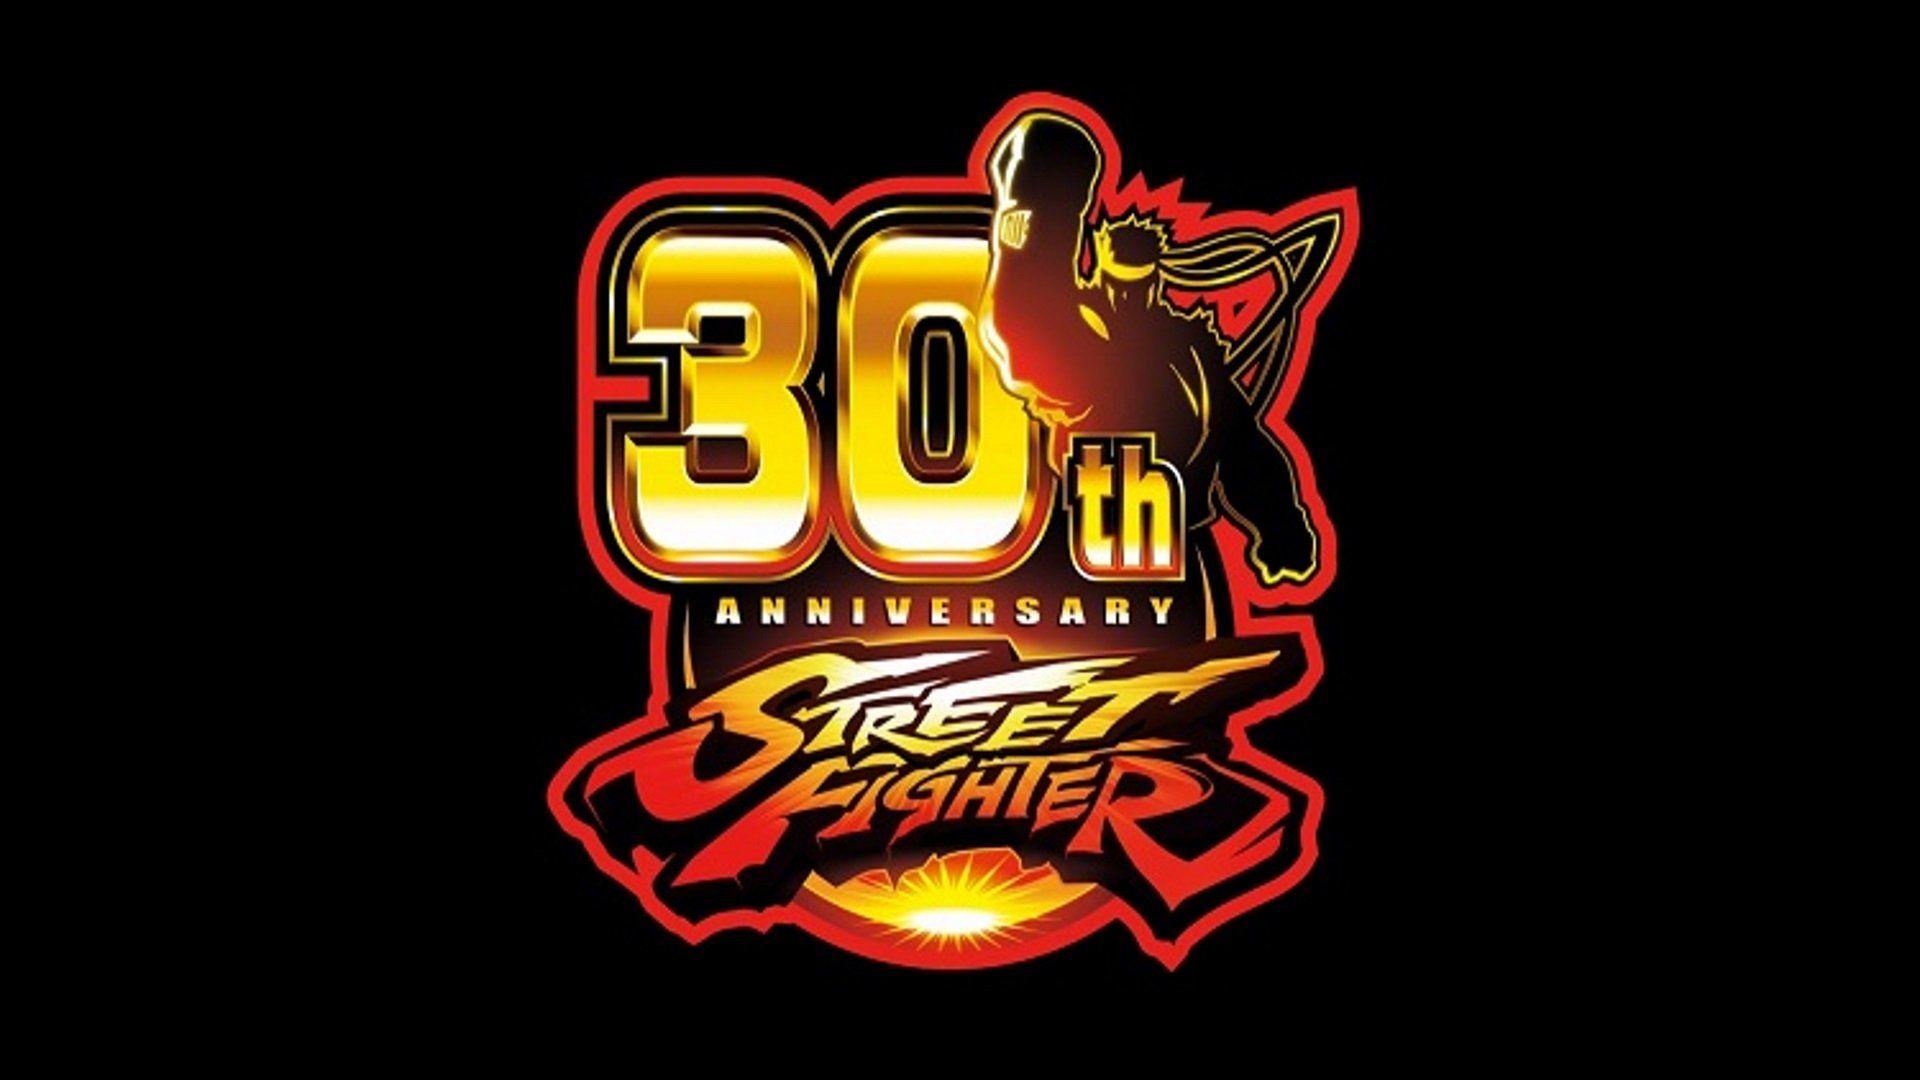 Street Fighter 30th Anniversary Collection is chock full of games